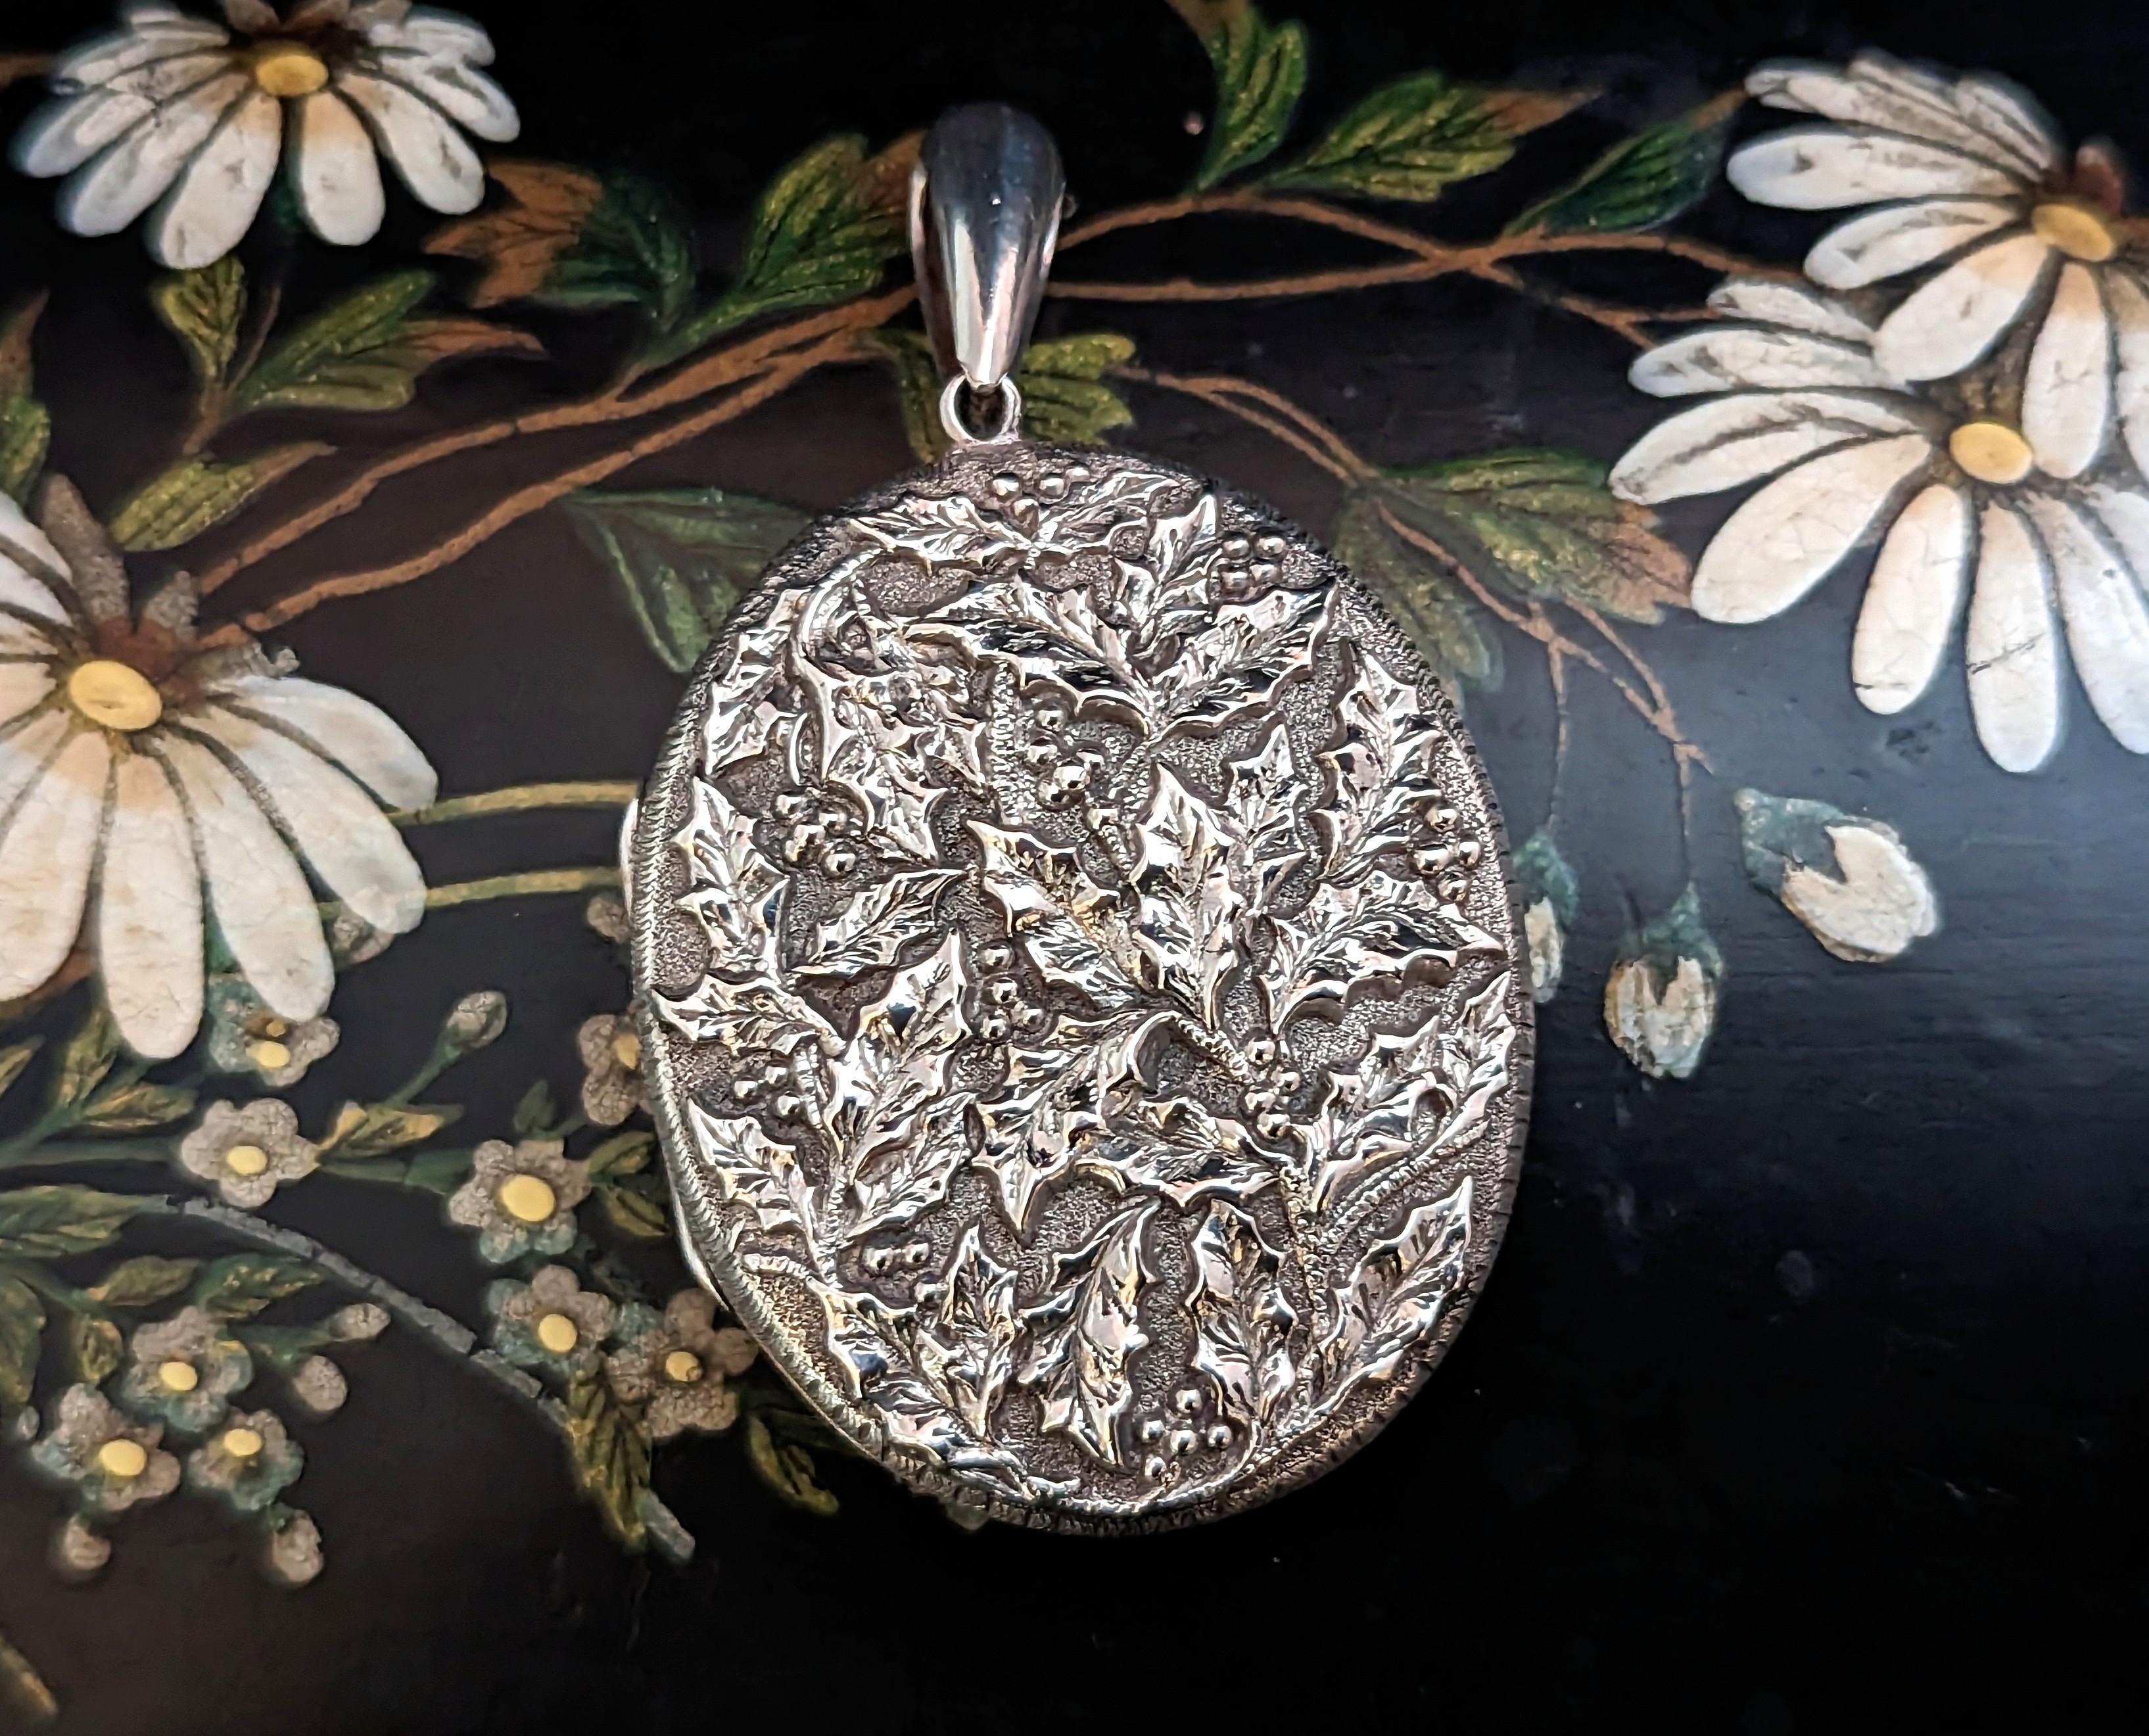 A stunning antique Victorian sterling silver locket pendant.

A large sized oval locket with a beautiful repousse design of Holly leaves and berries.

The locket has the same design front and back and is able to hold photographs or a tiny keepsake,